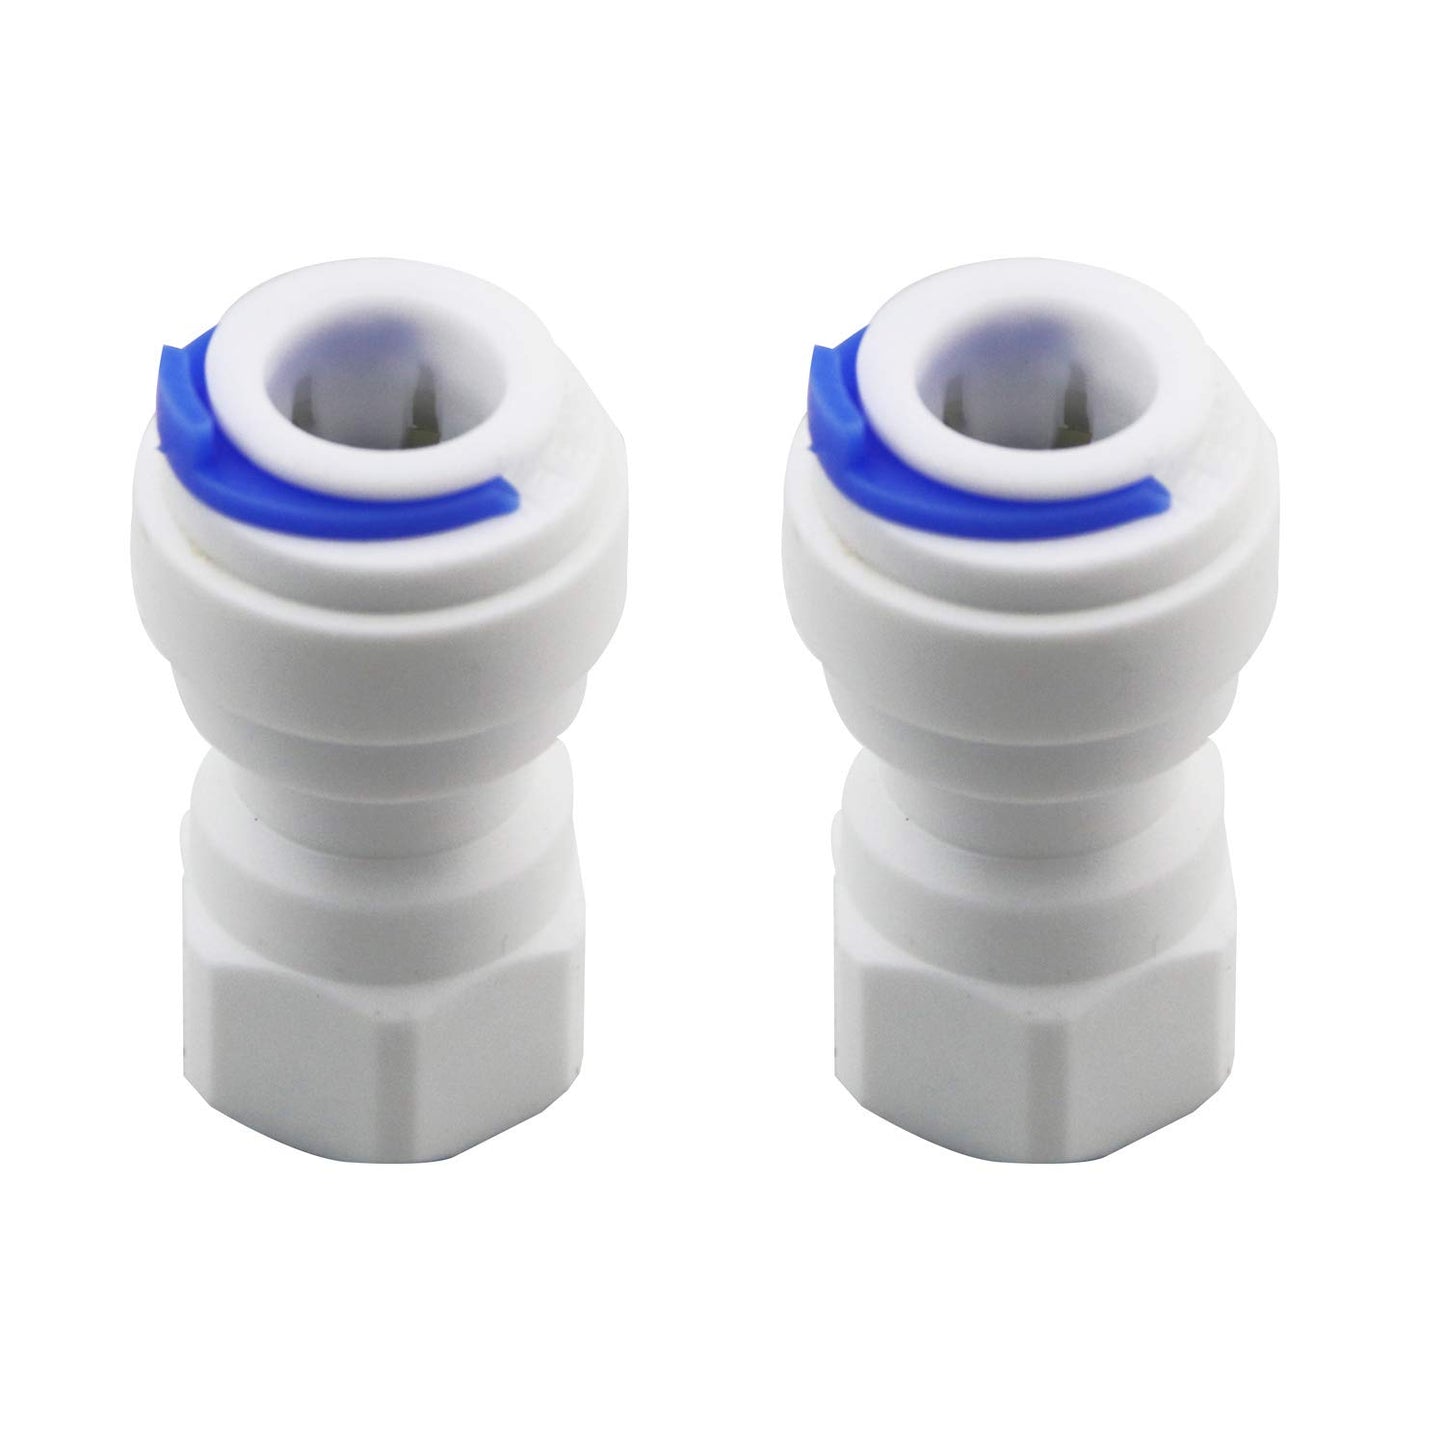 Faucet Quick Connector Fitting Parts for Reverse Osmosis RO System 1/4" Thread x 3/8" Tube (DC-019)